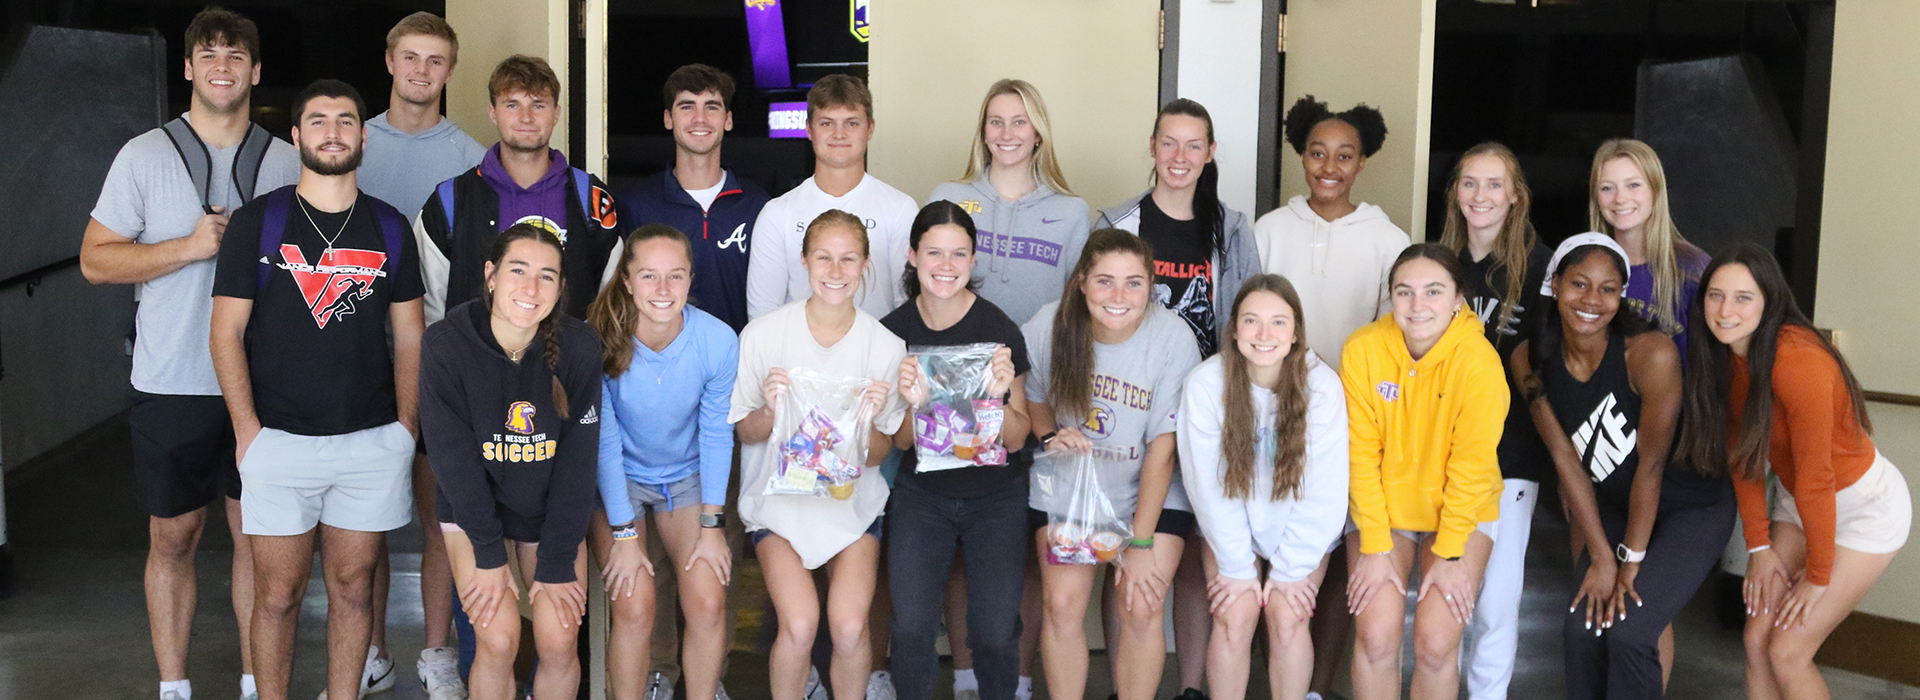 Tech SAAC supports Anna Cooper's Backpack Buddies' mission